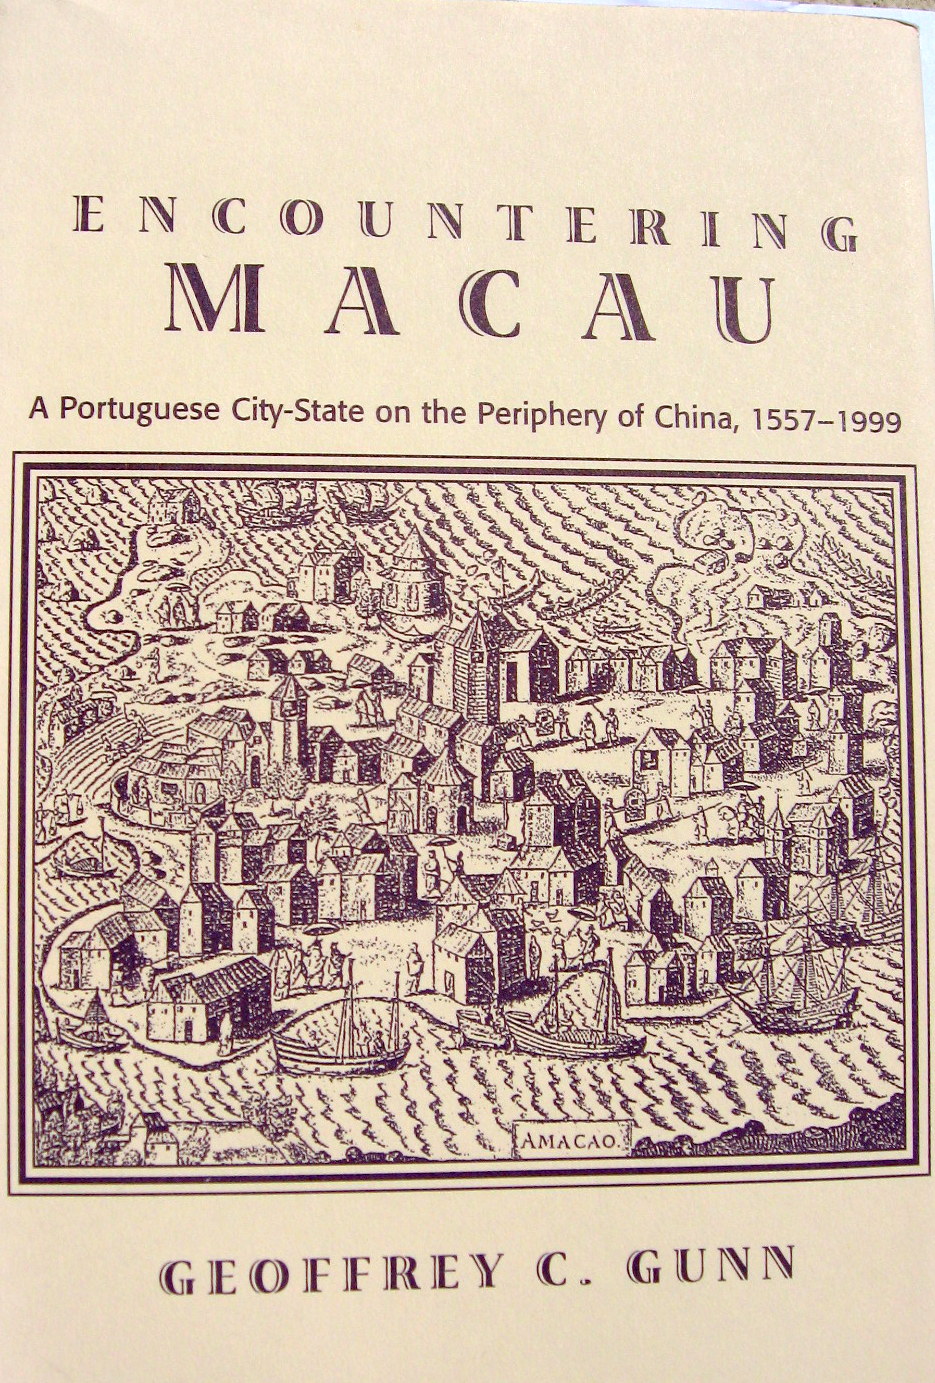 Encountering Macau: A Portuguese City-state on the Periphery of China, 1557-1999